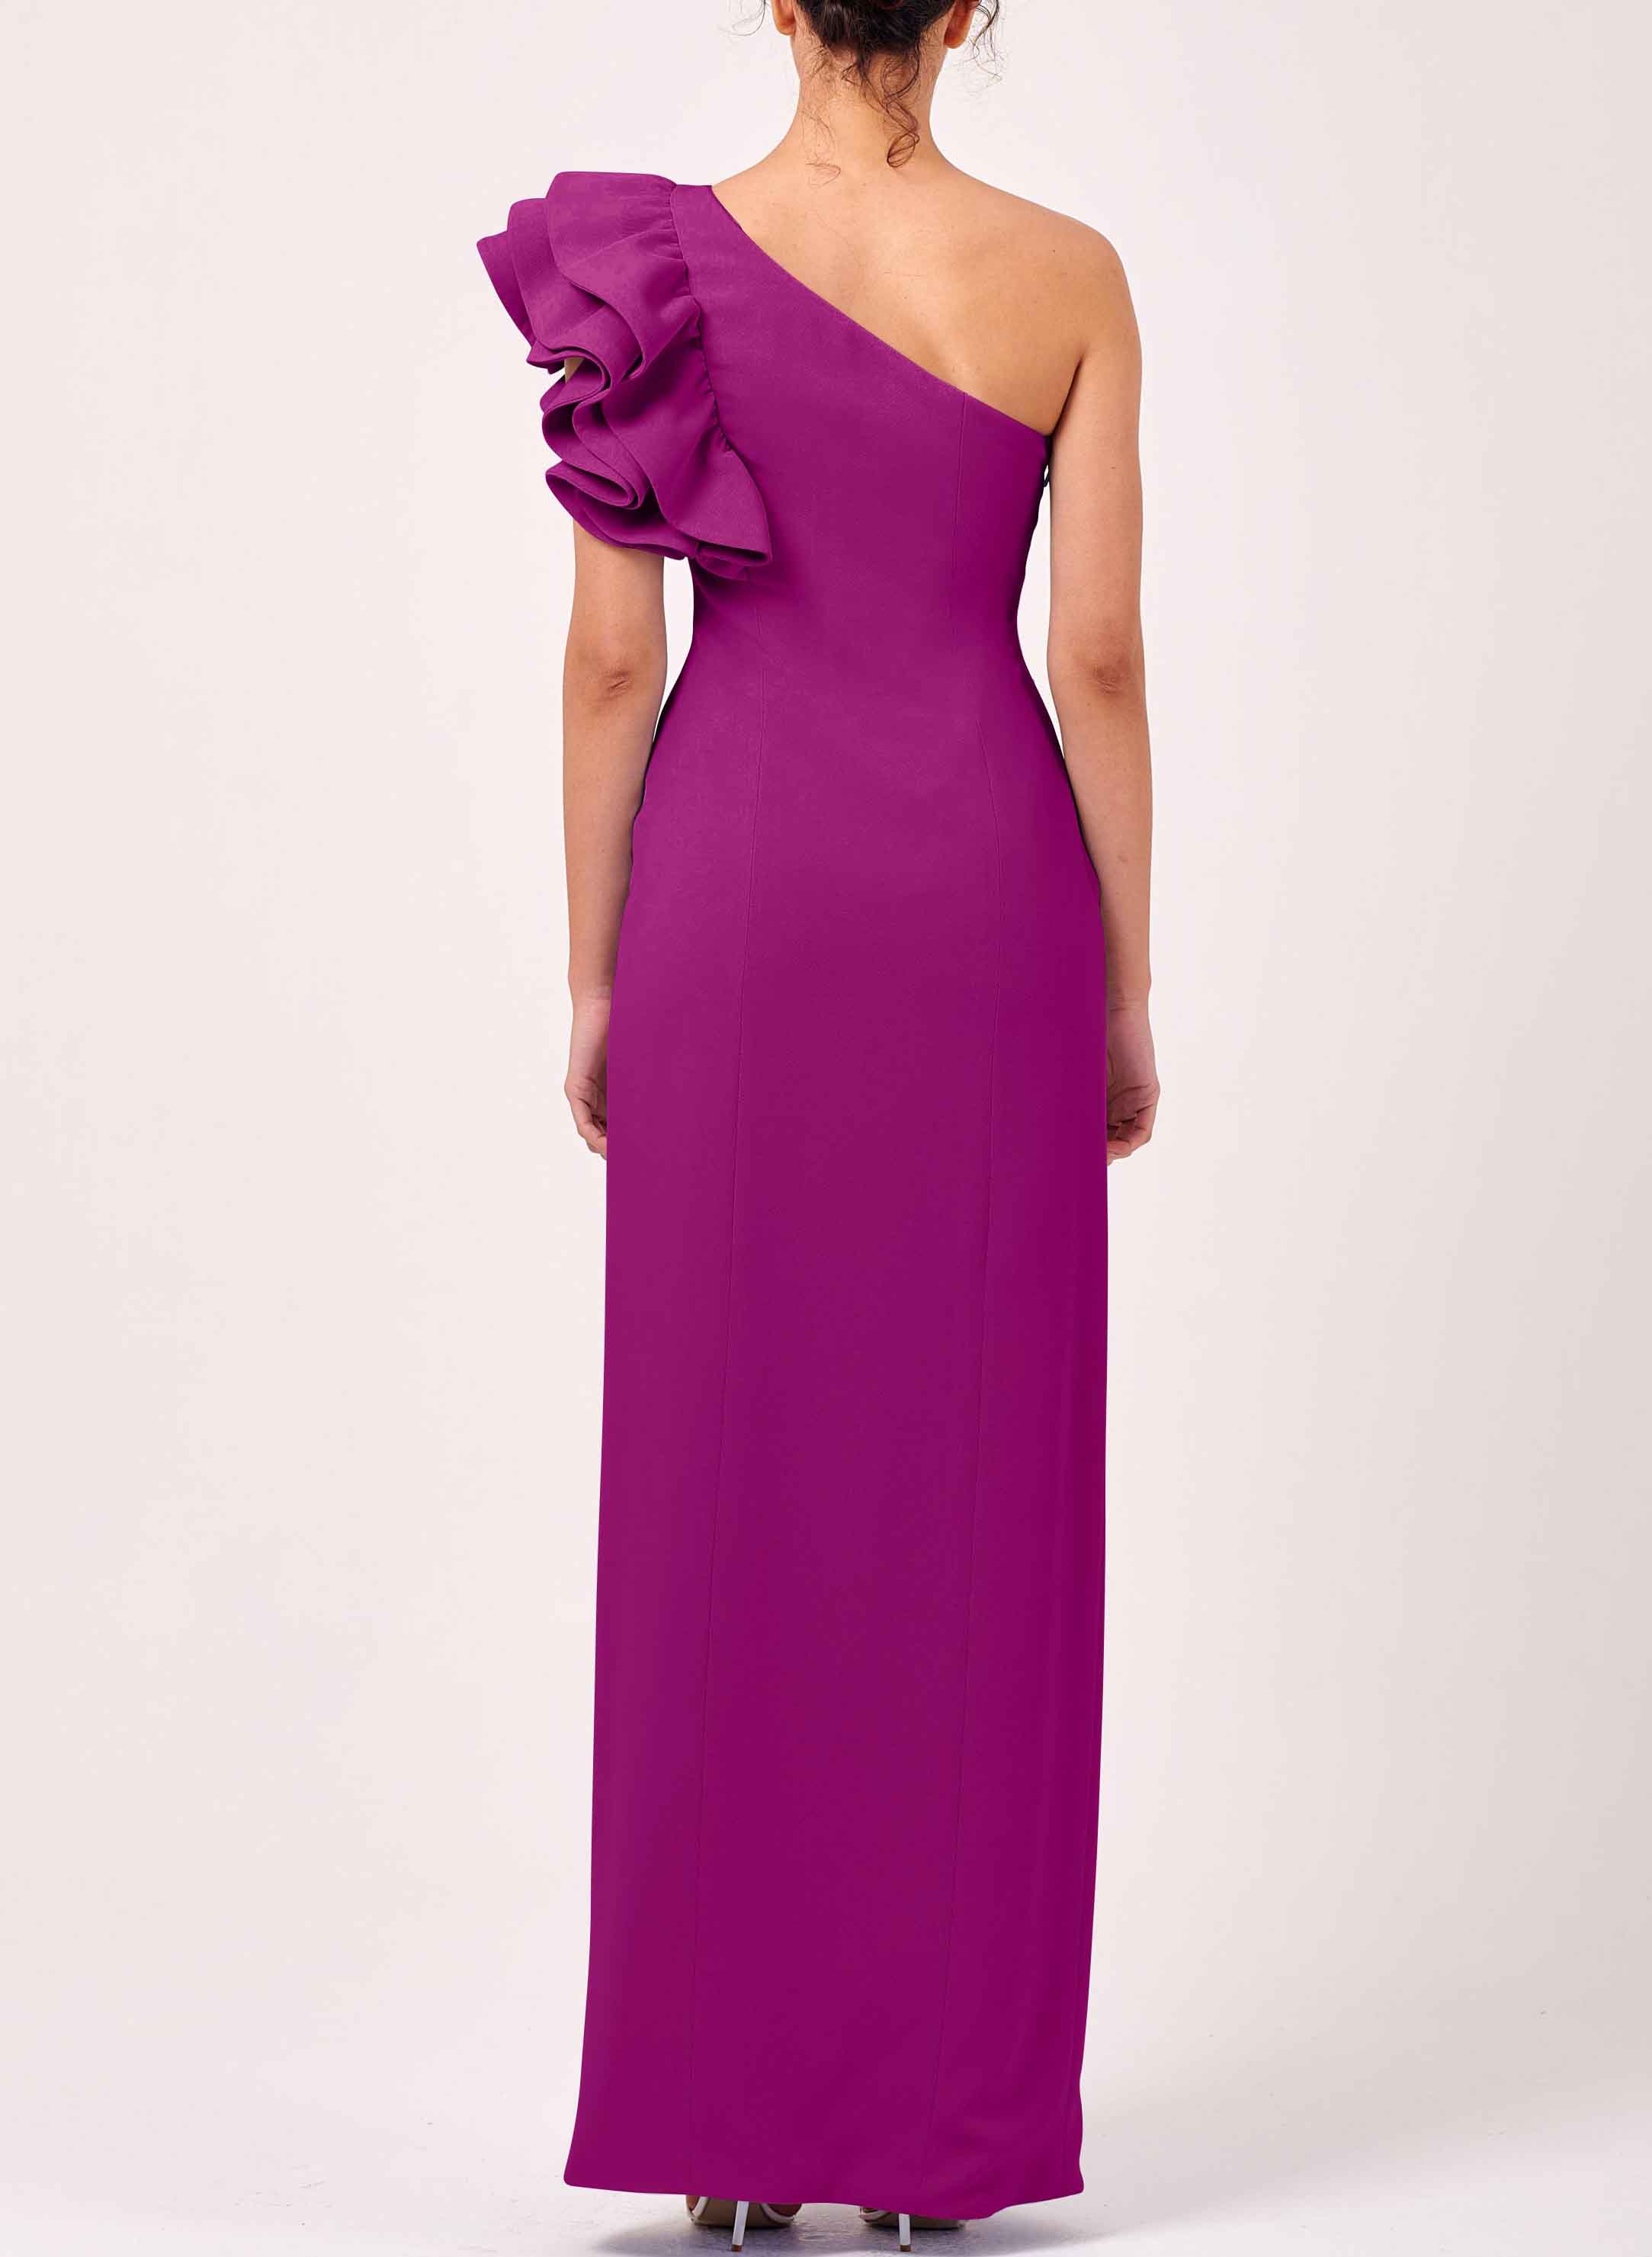 Elegant One-Shoulder Sheath/Column Mother Of The Bride Dresses With Cascading Ruffles